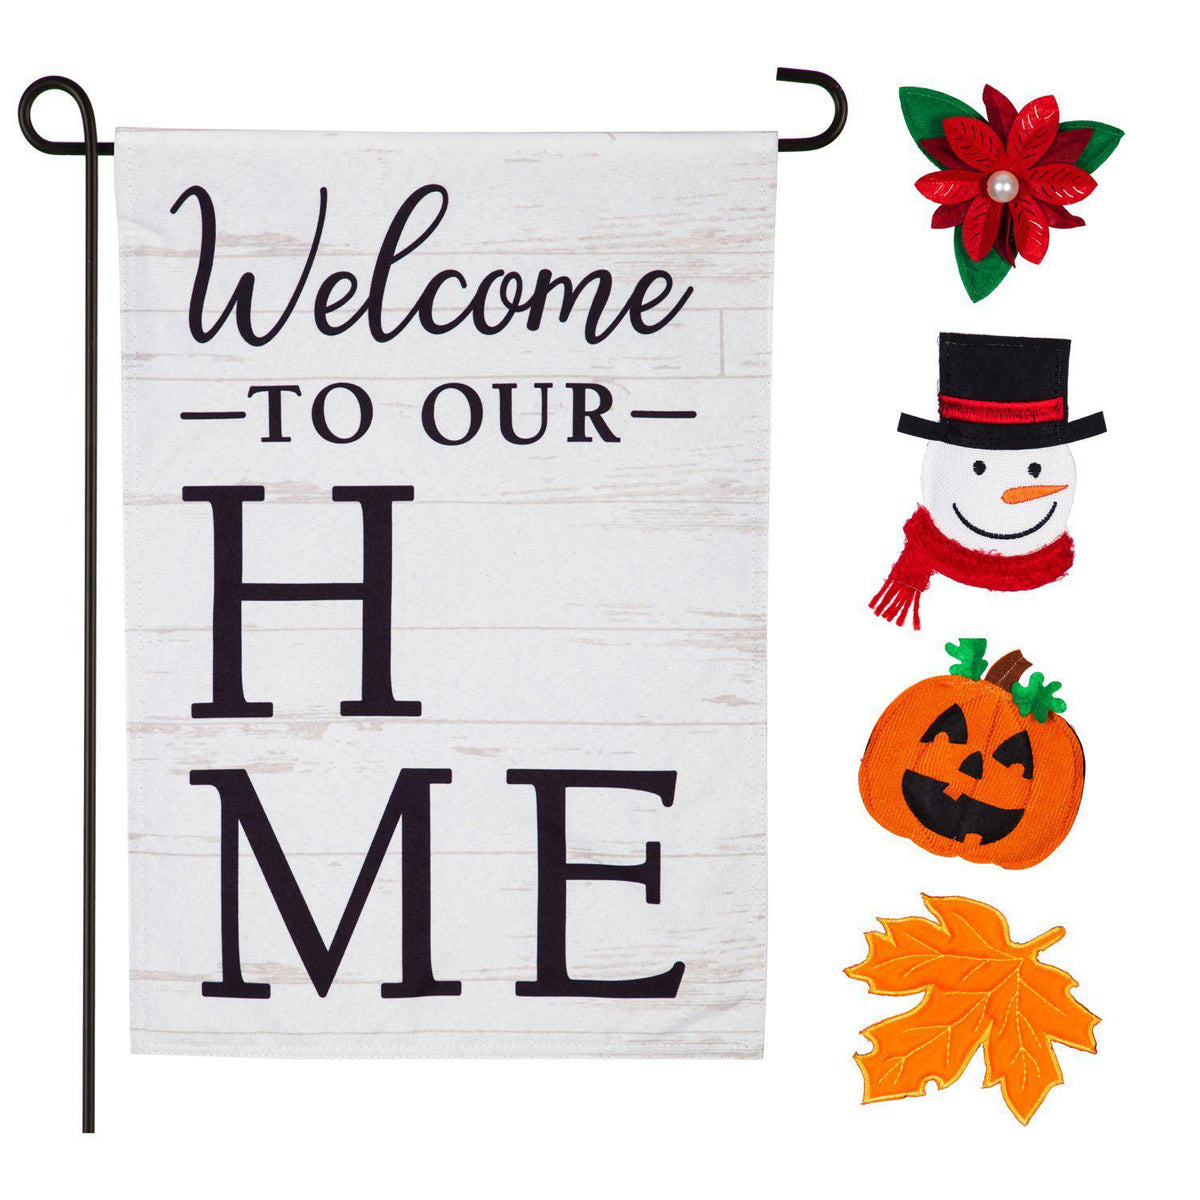 Welcome to Our Home Interchangeable Garden Flag for Fall and Winter